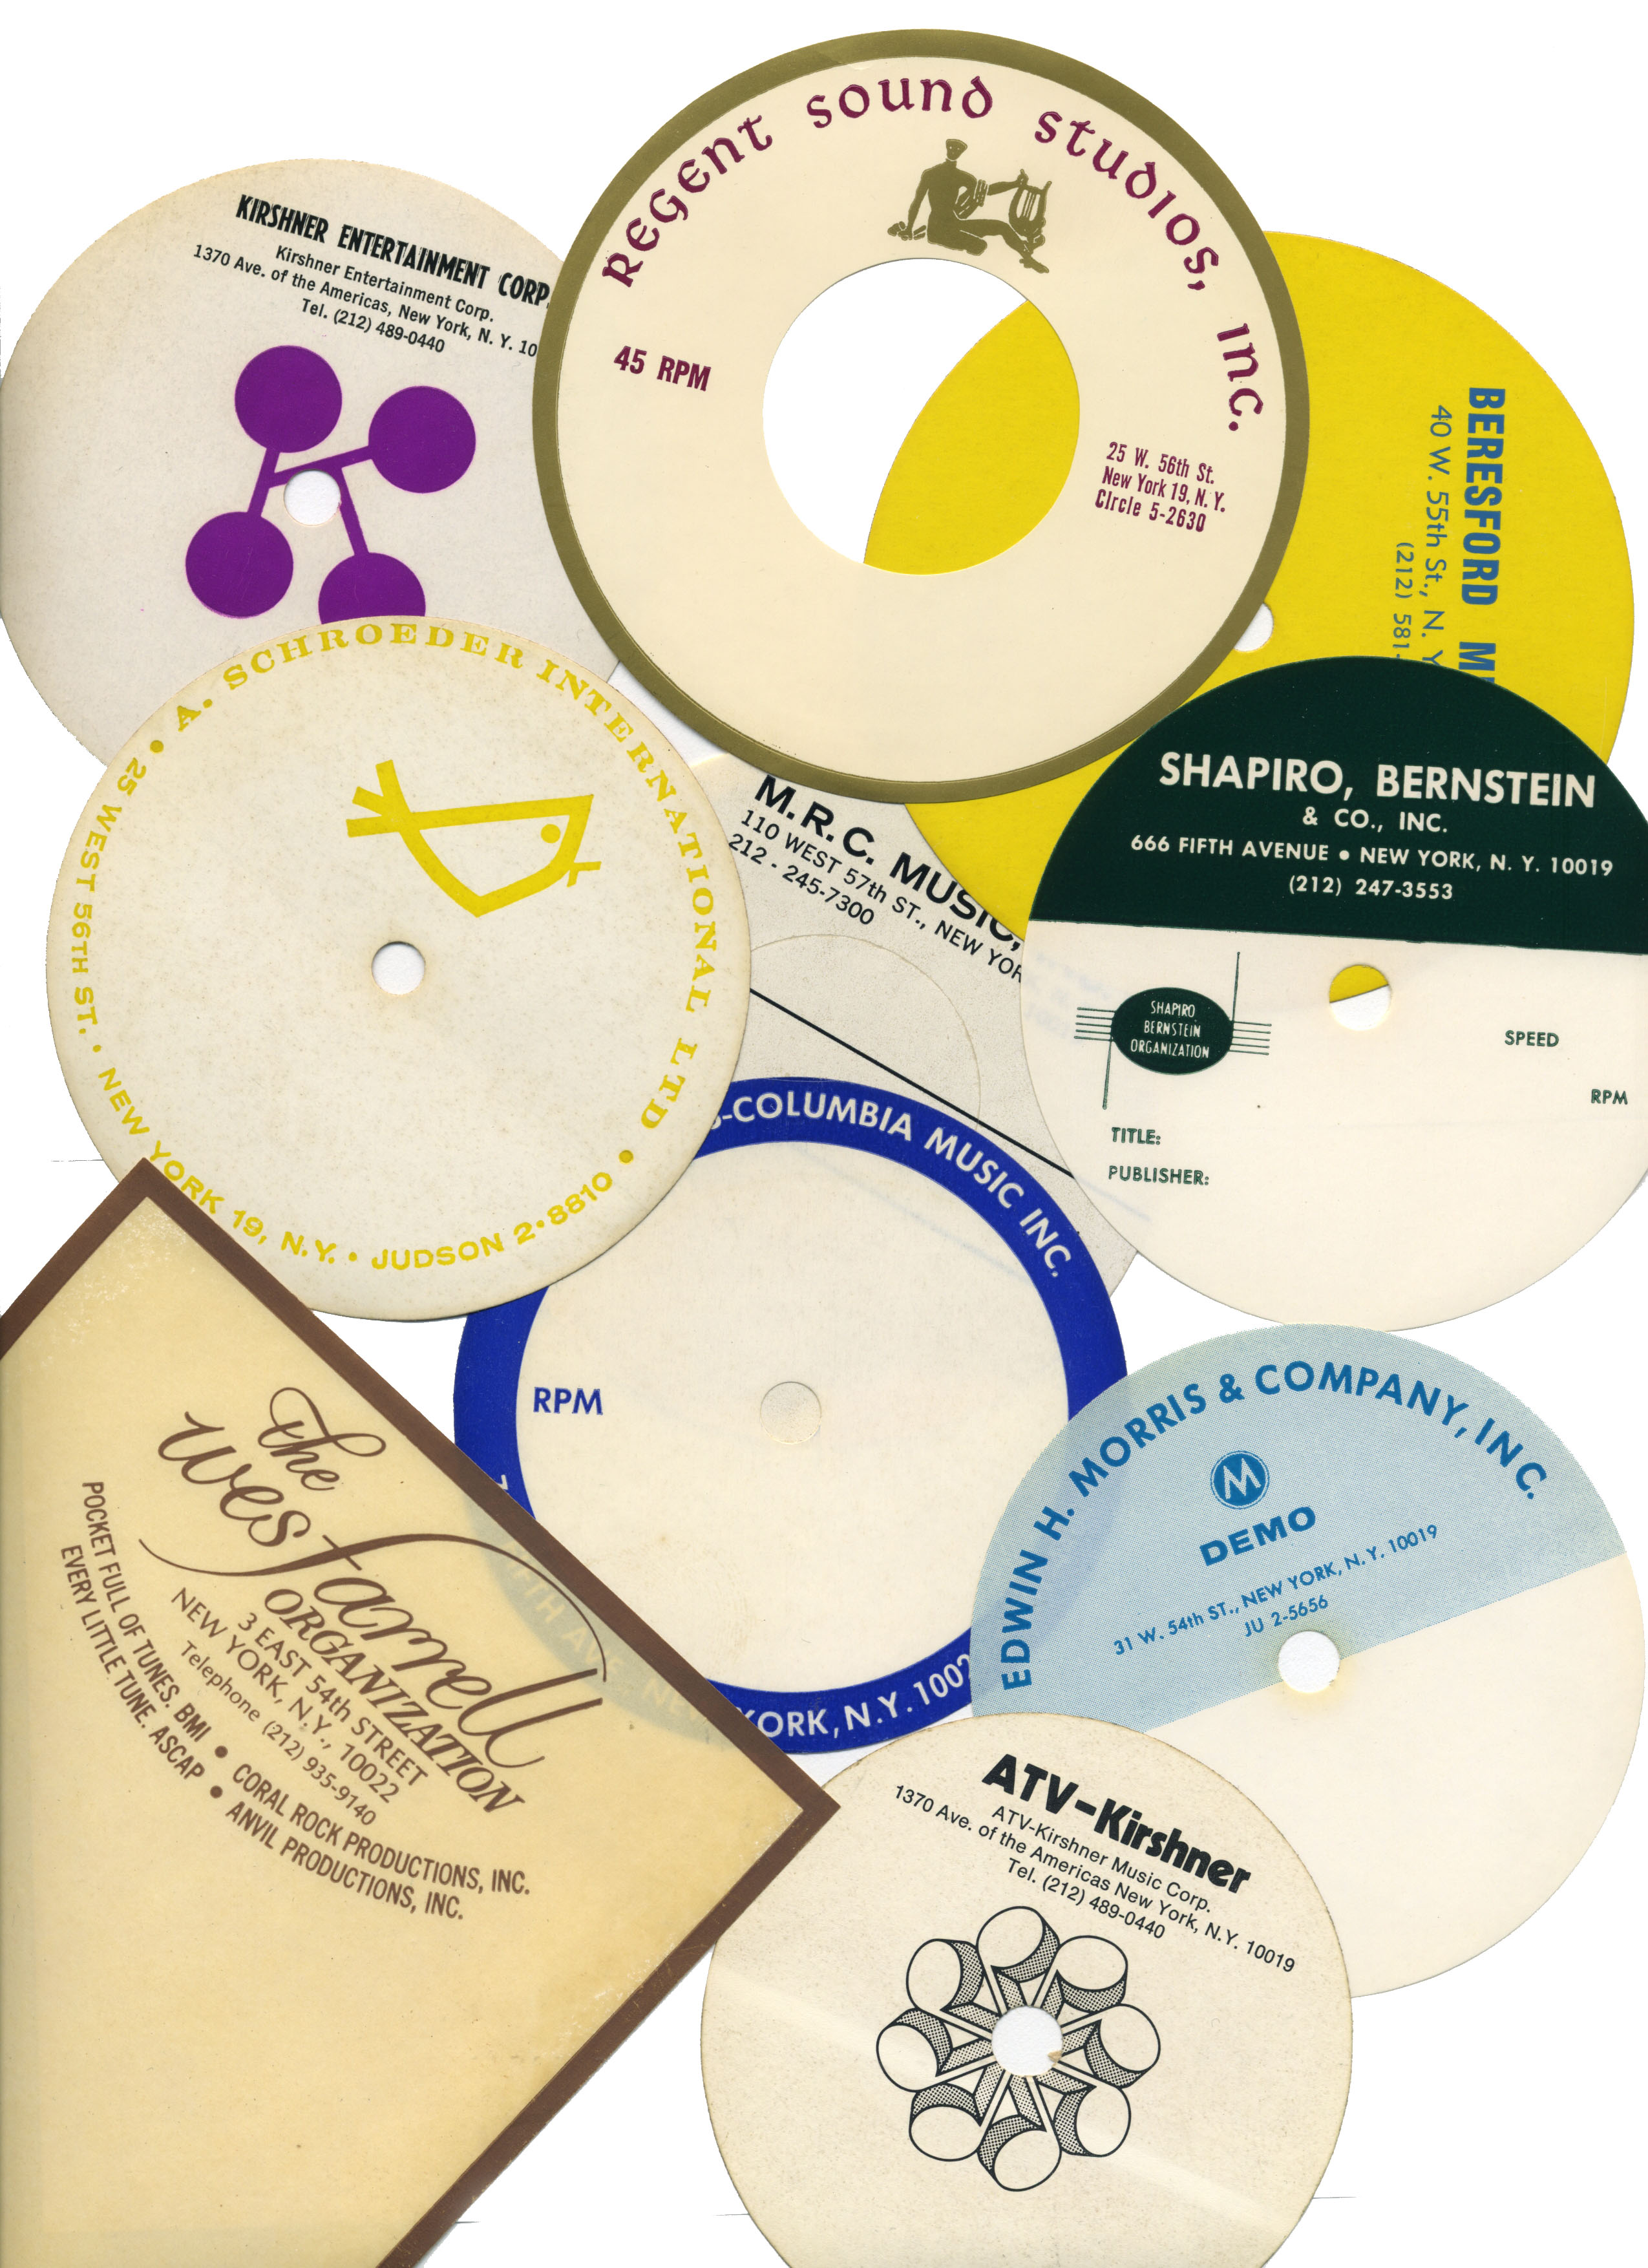 Collage of music tape labels by Josh Alan Friedman at Regent Sound in 1974